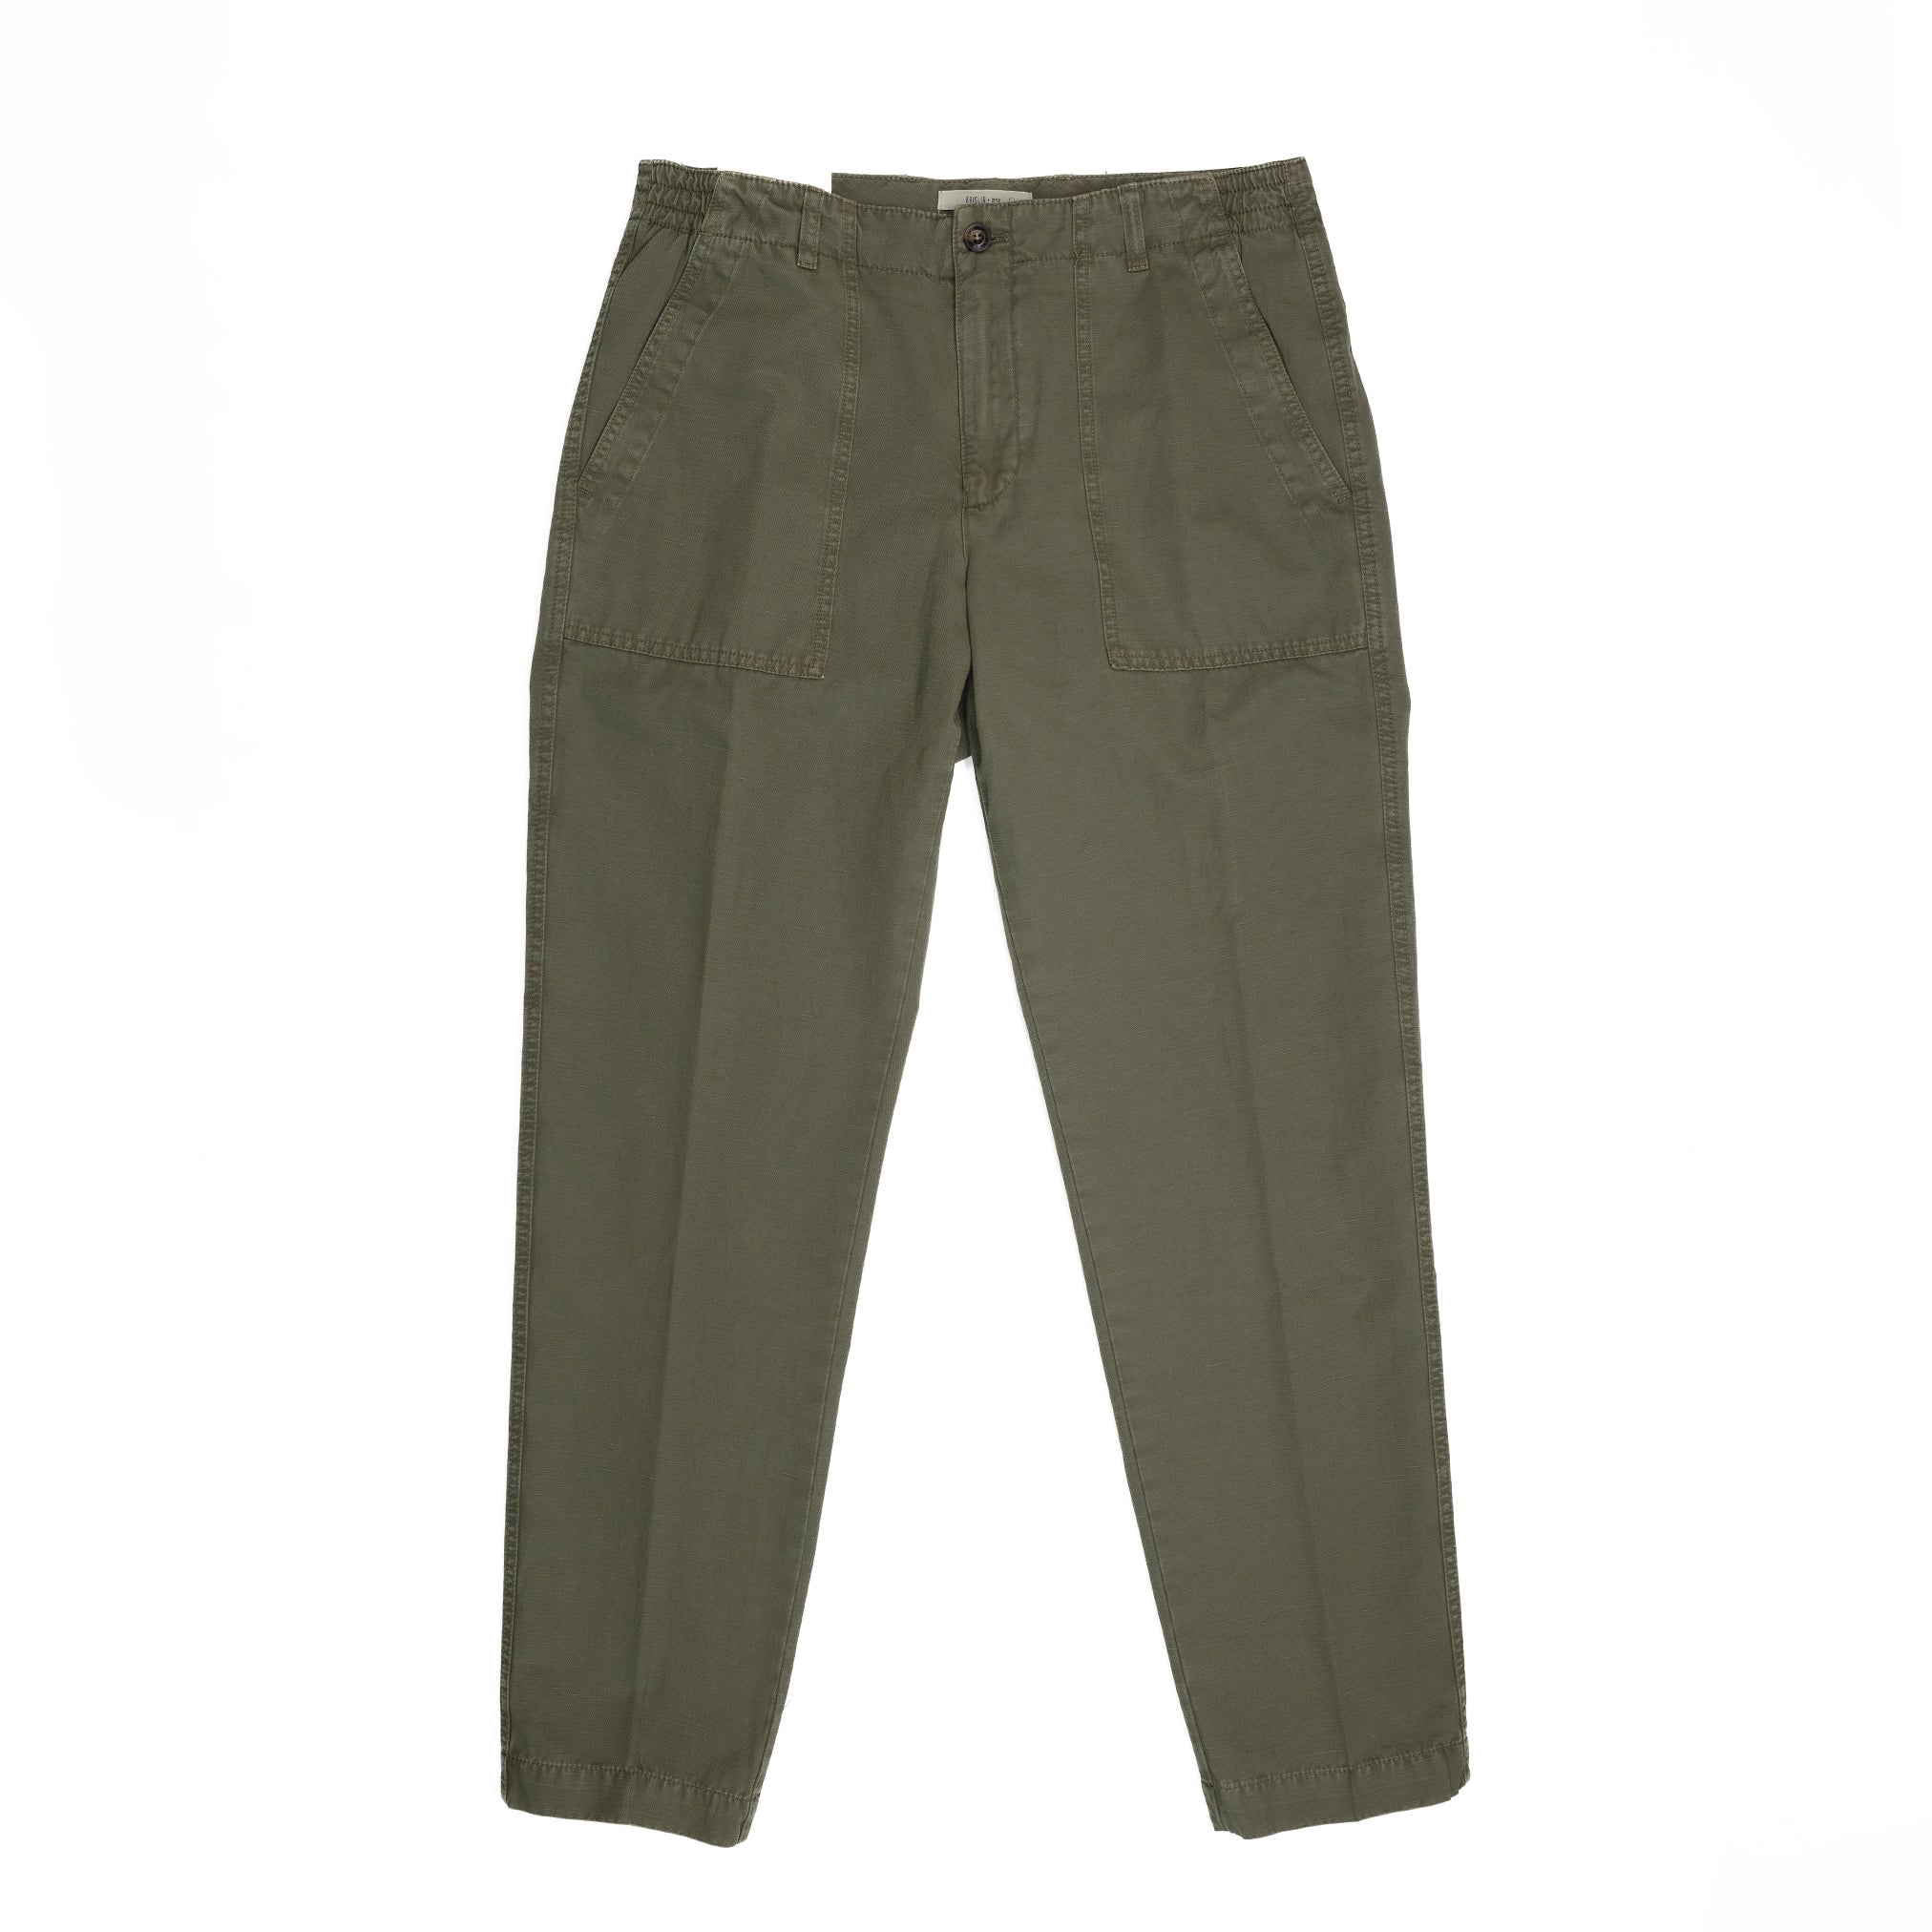 Cotton & Linen Fatigues in Green